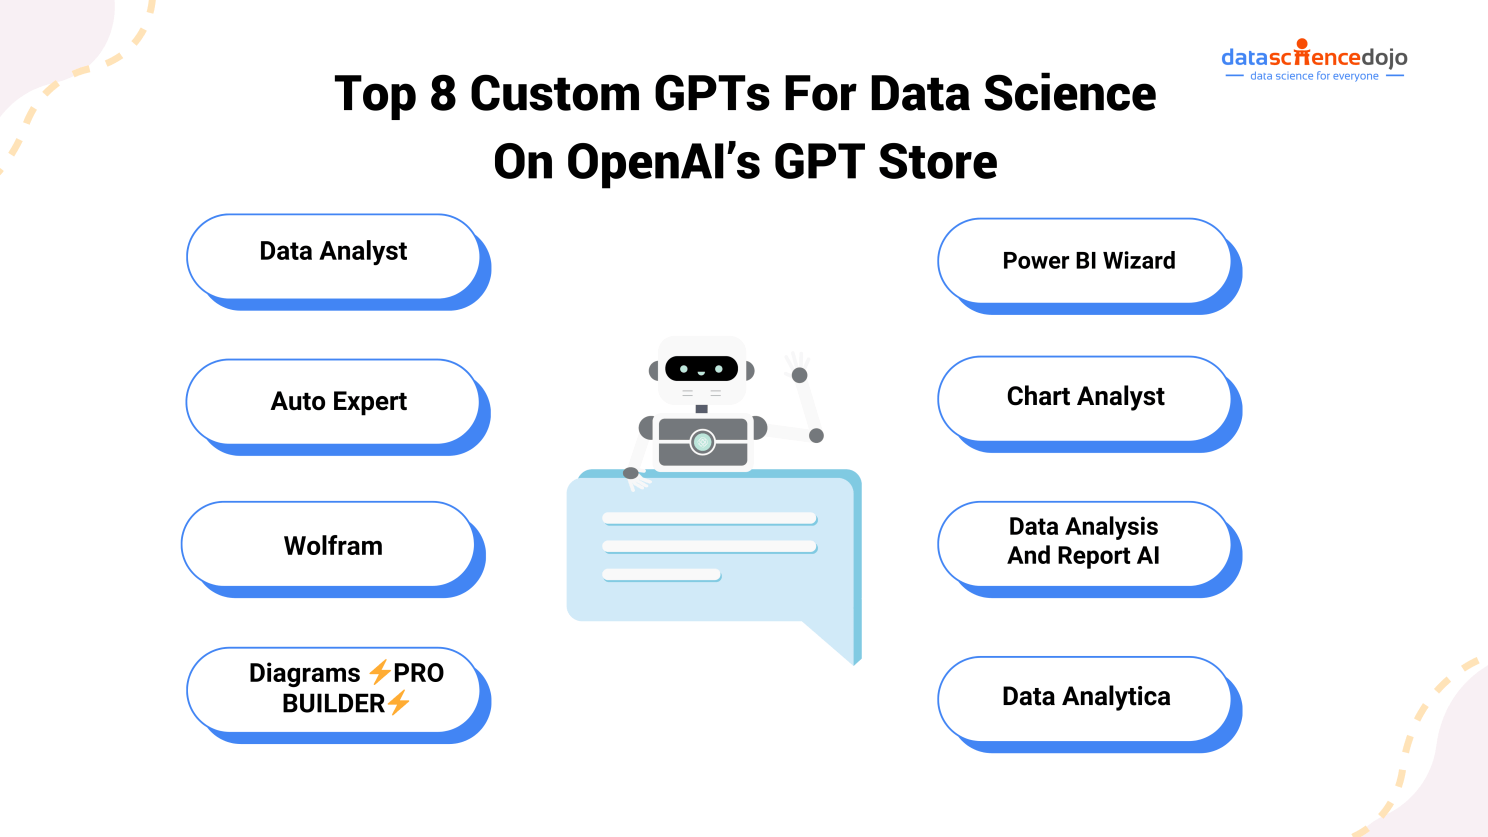 Top 8 Custom GPTs for Data Science on OpenAI's GPT Store